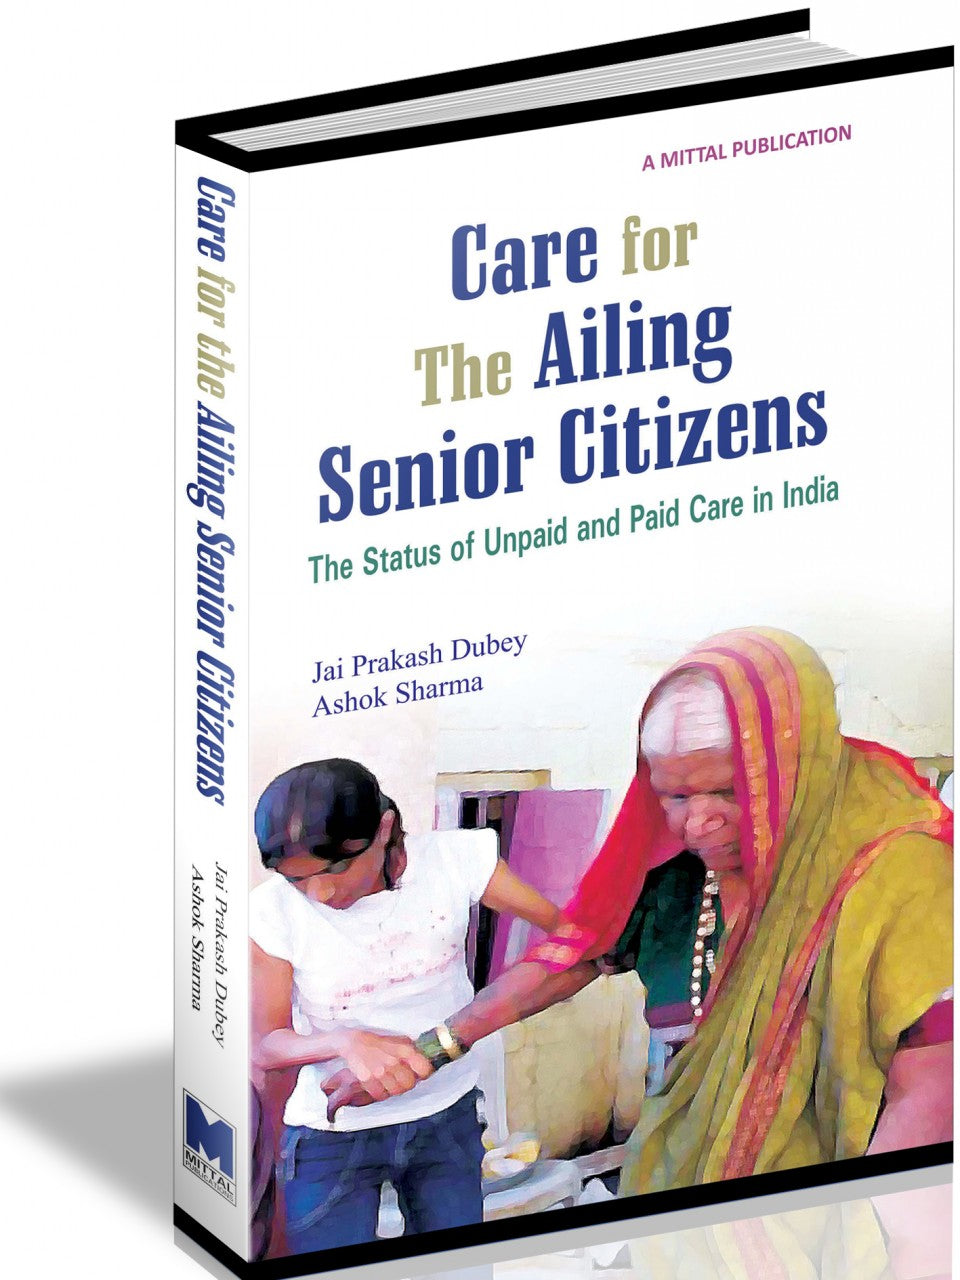 Care for the Ailing Senior Citizens